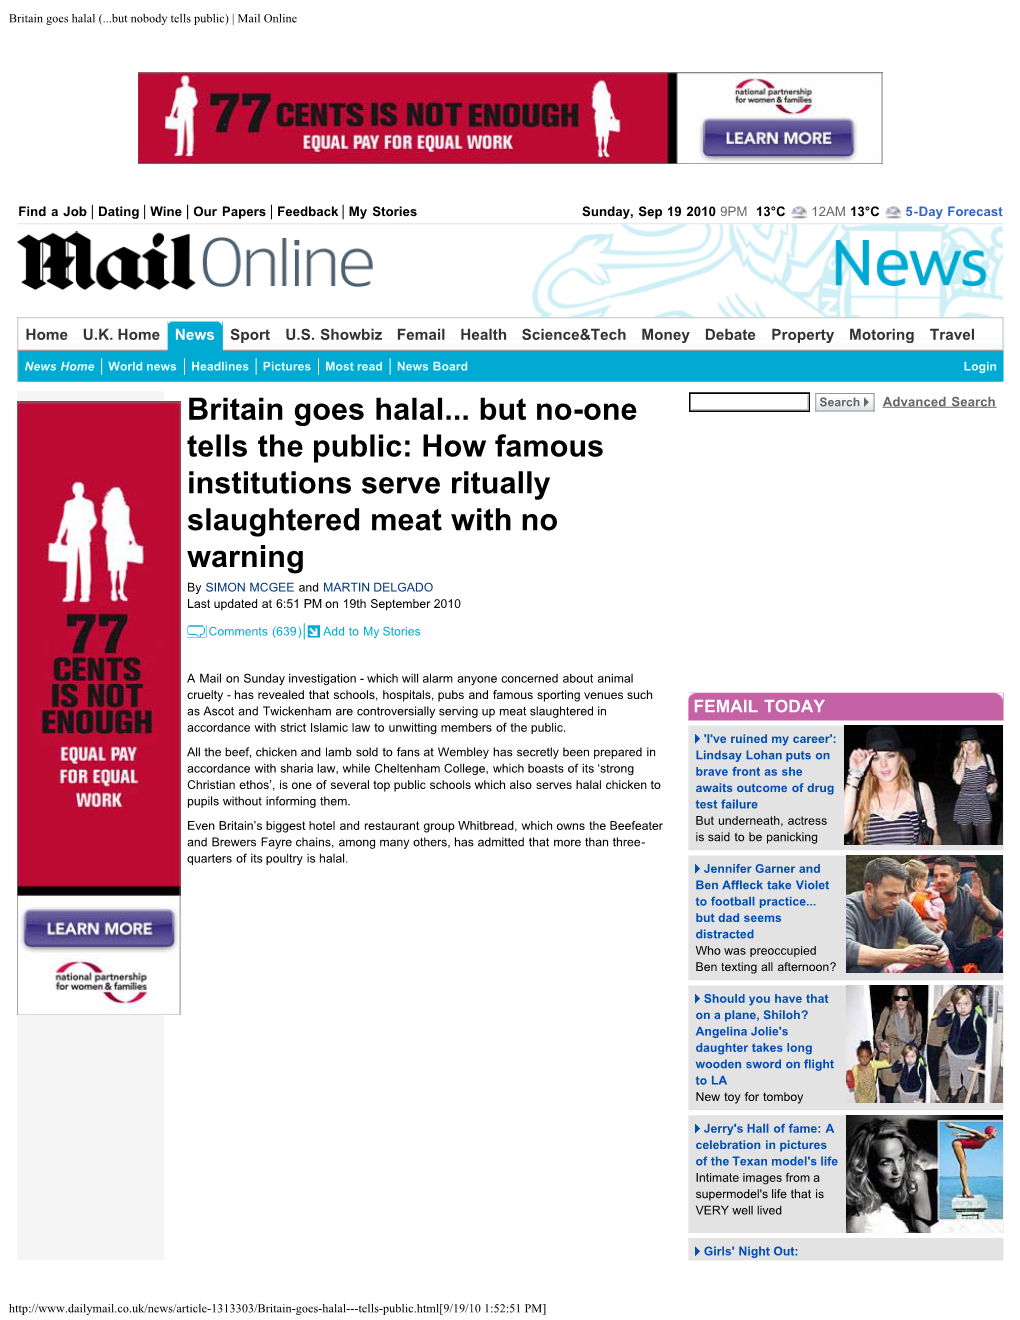 Britain Goes Halal (...But Nobody Tells Public) | Mail Online